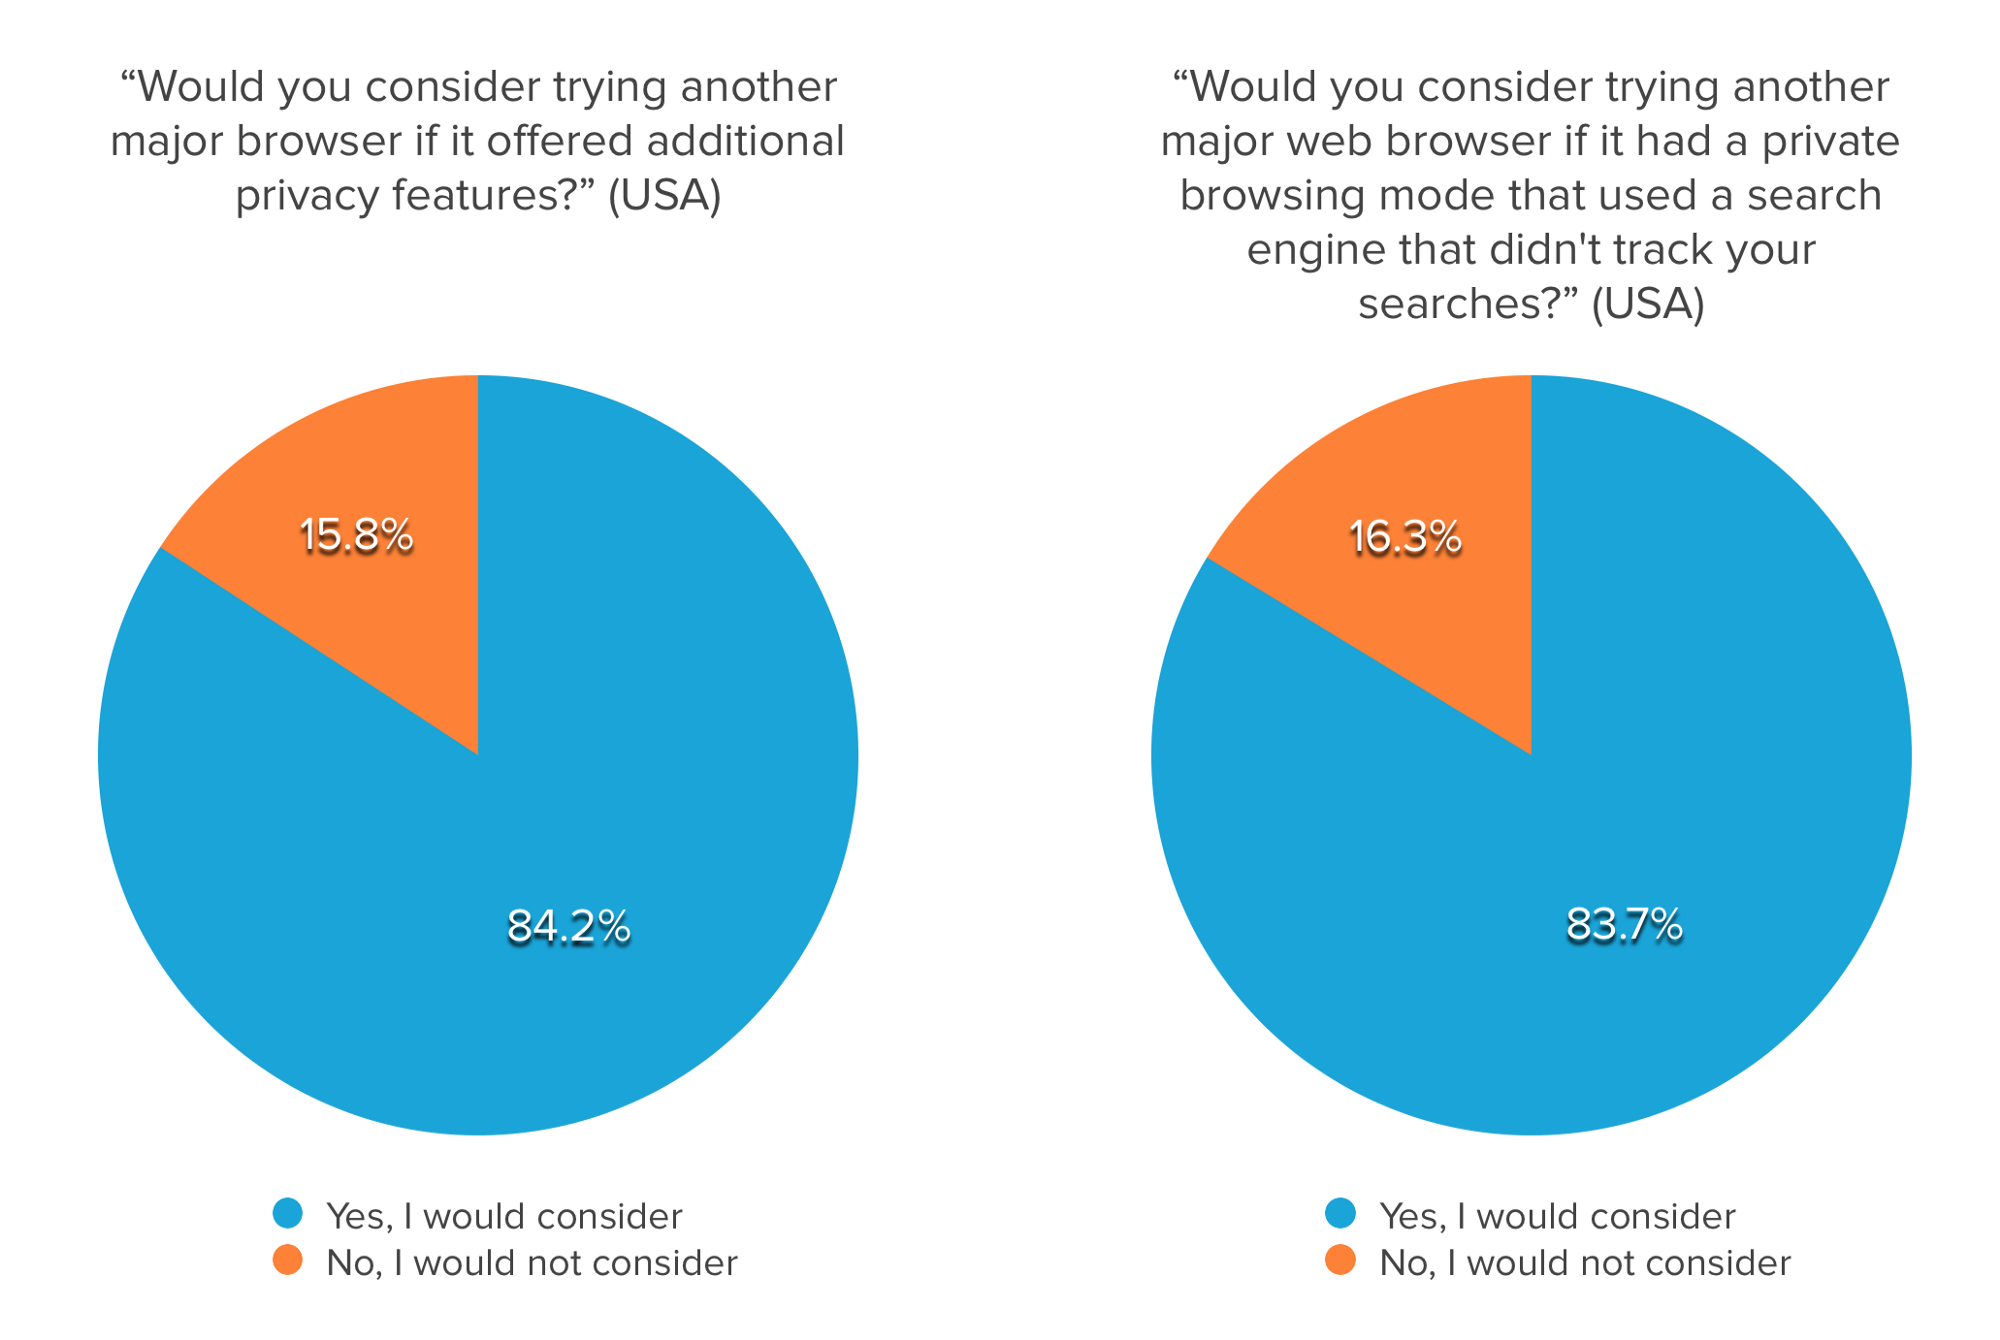 Chart showing that most people would consider trying another browser if it had extra private features.